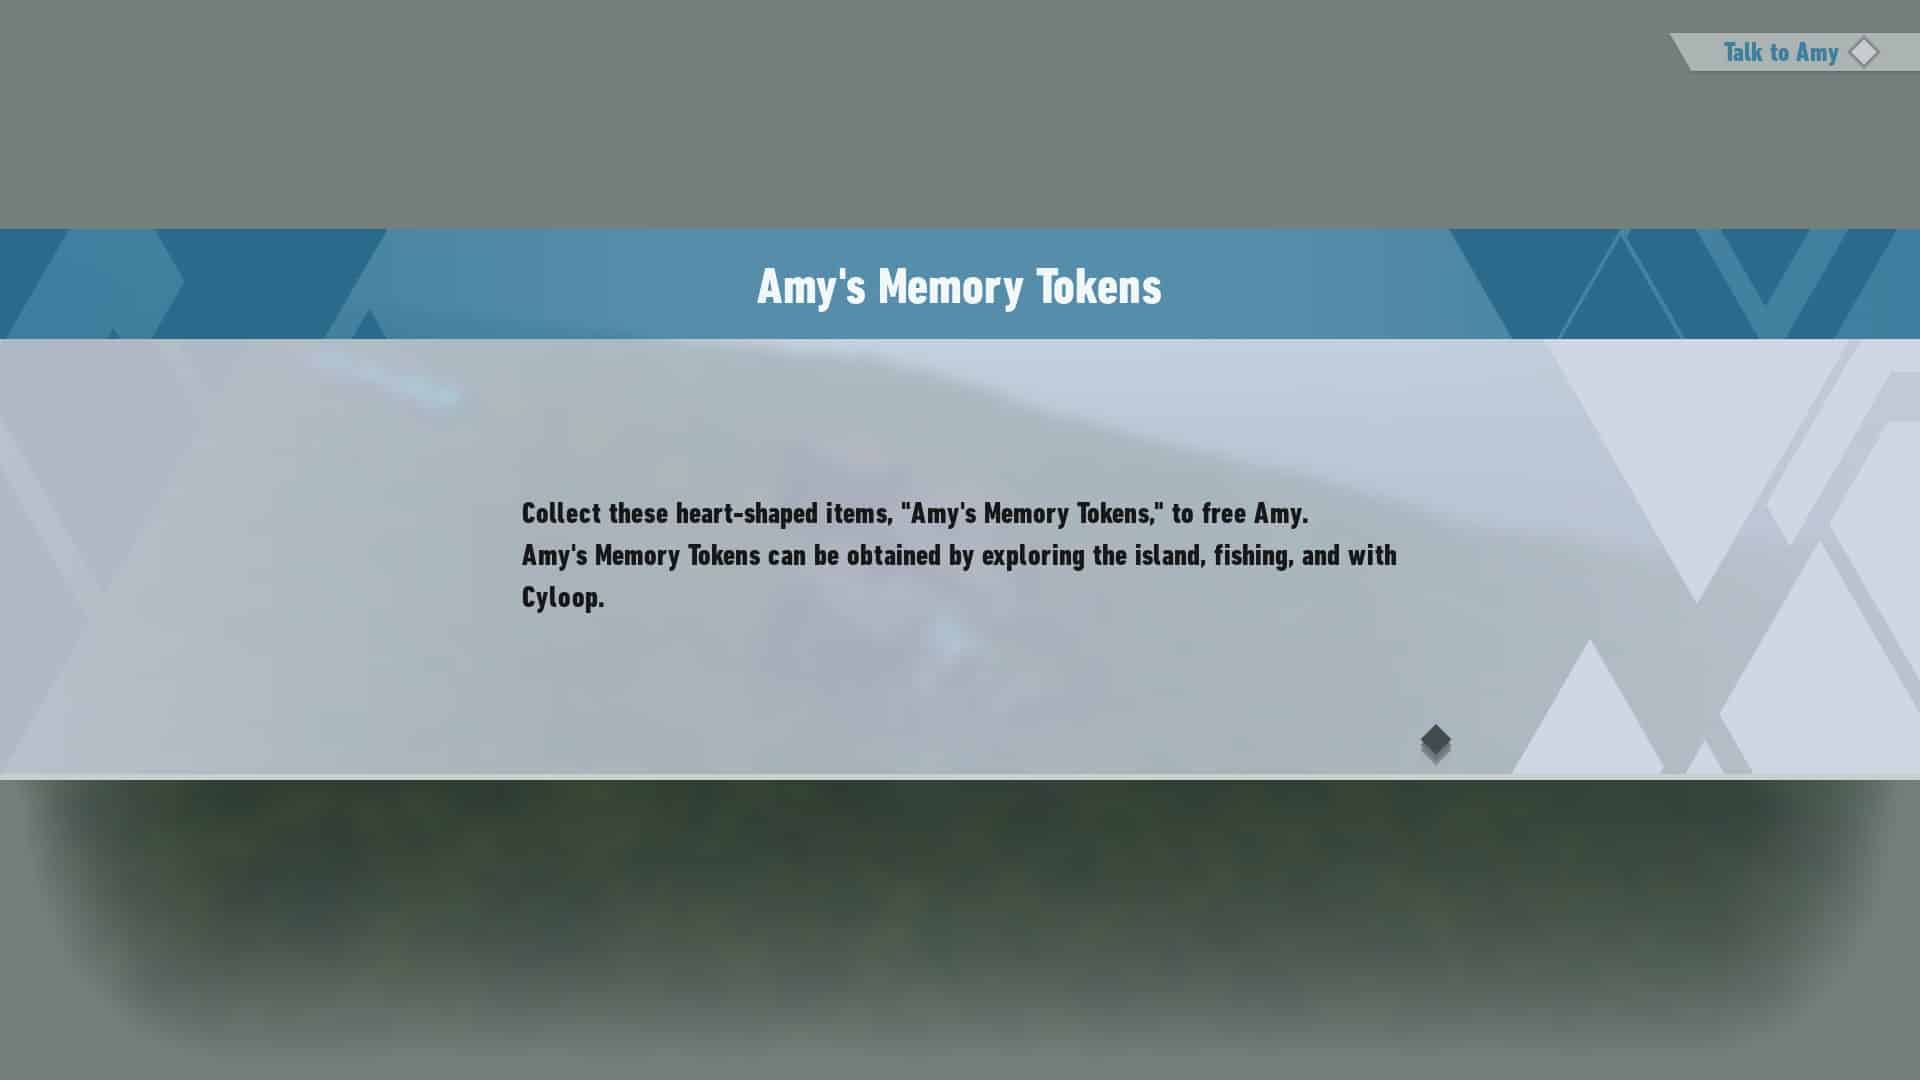 Memory Tokens allow you to free your friends